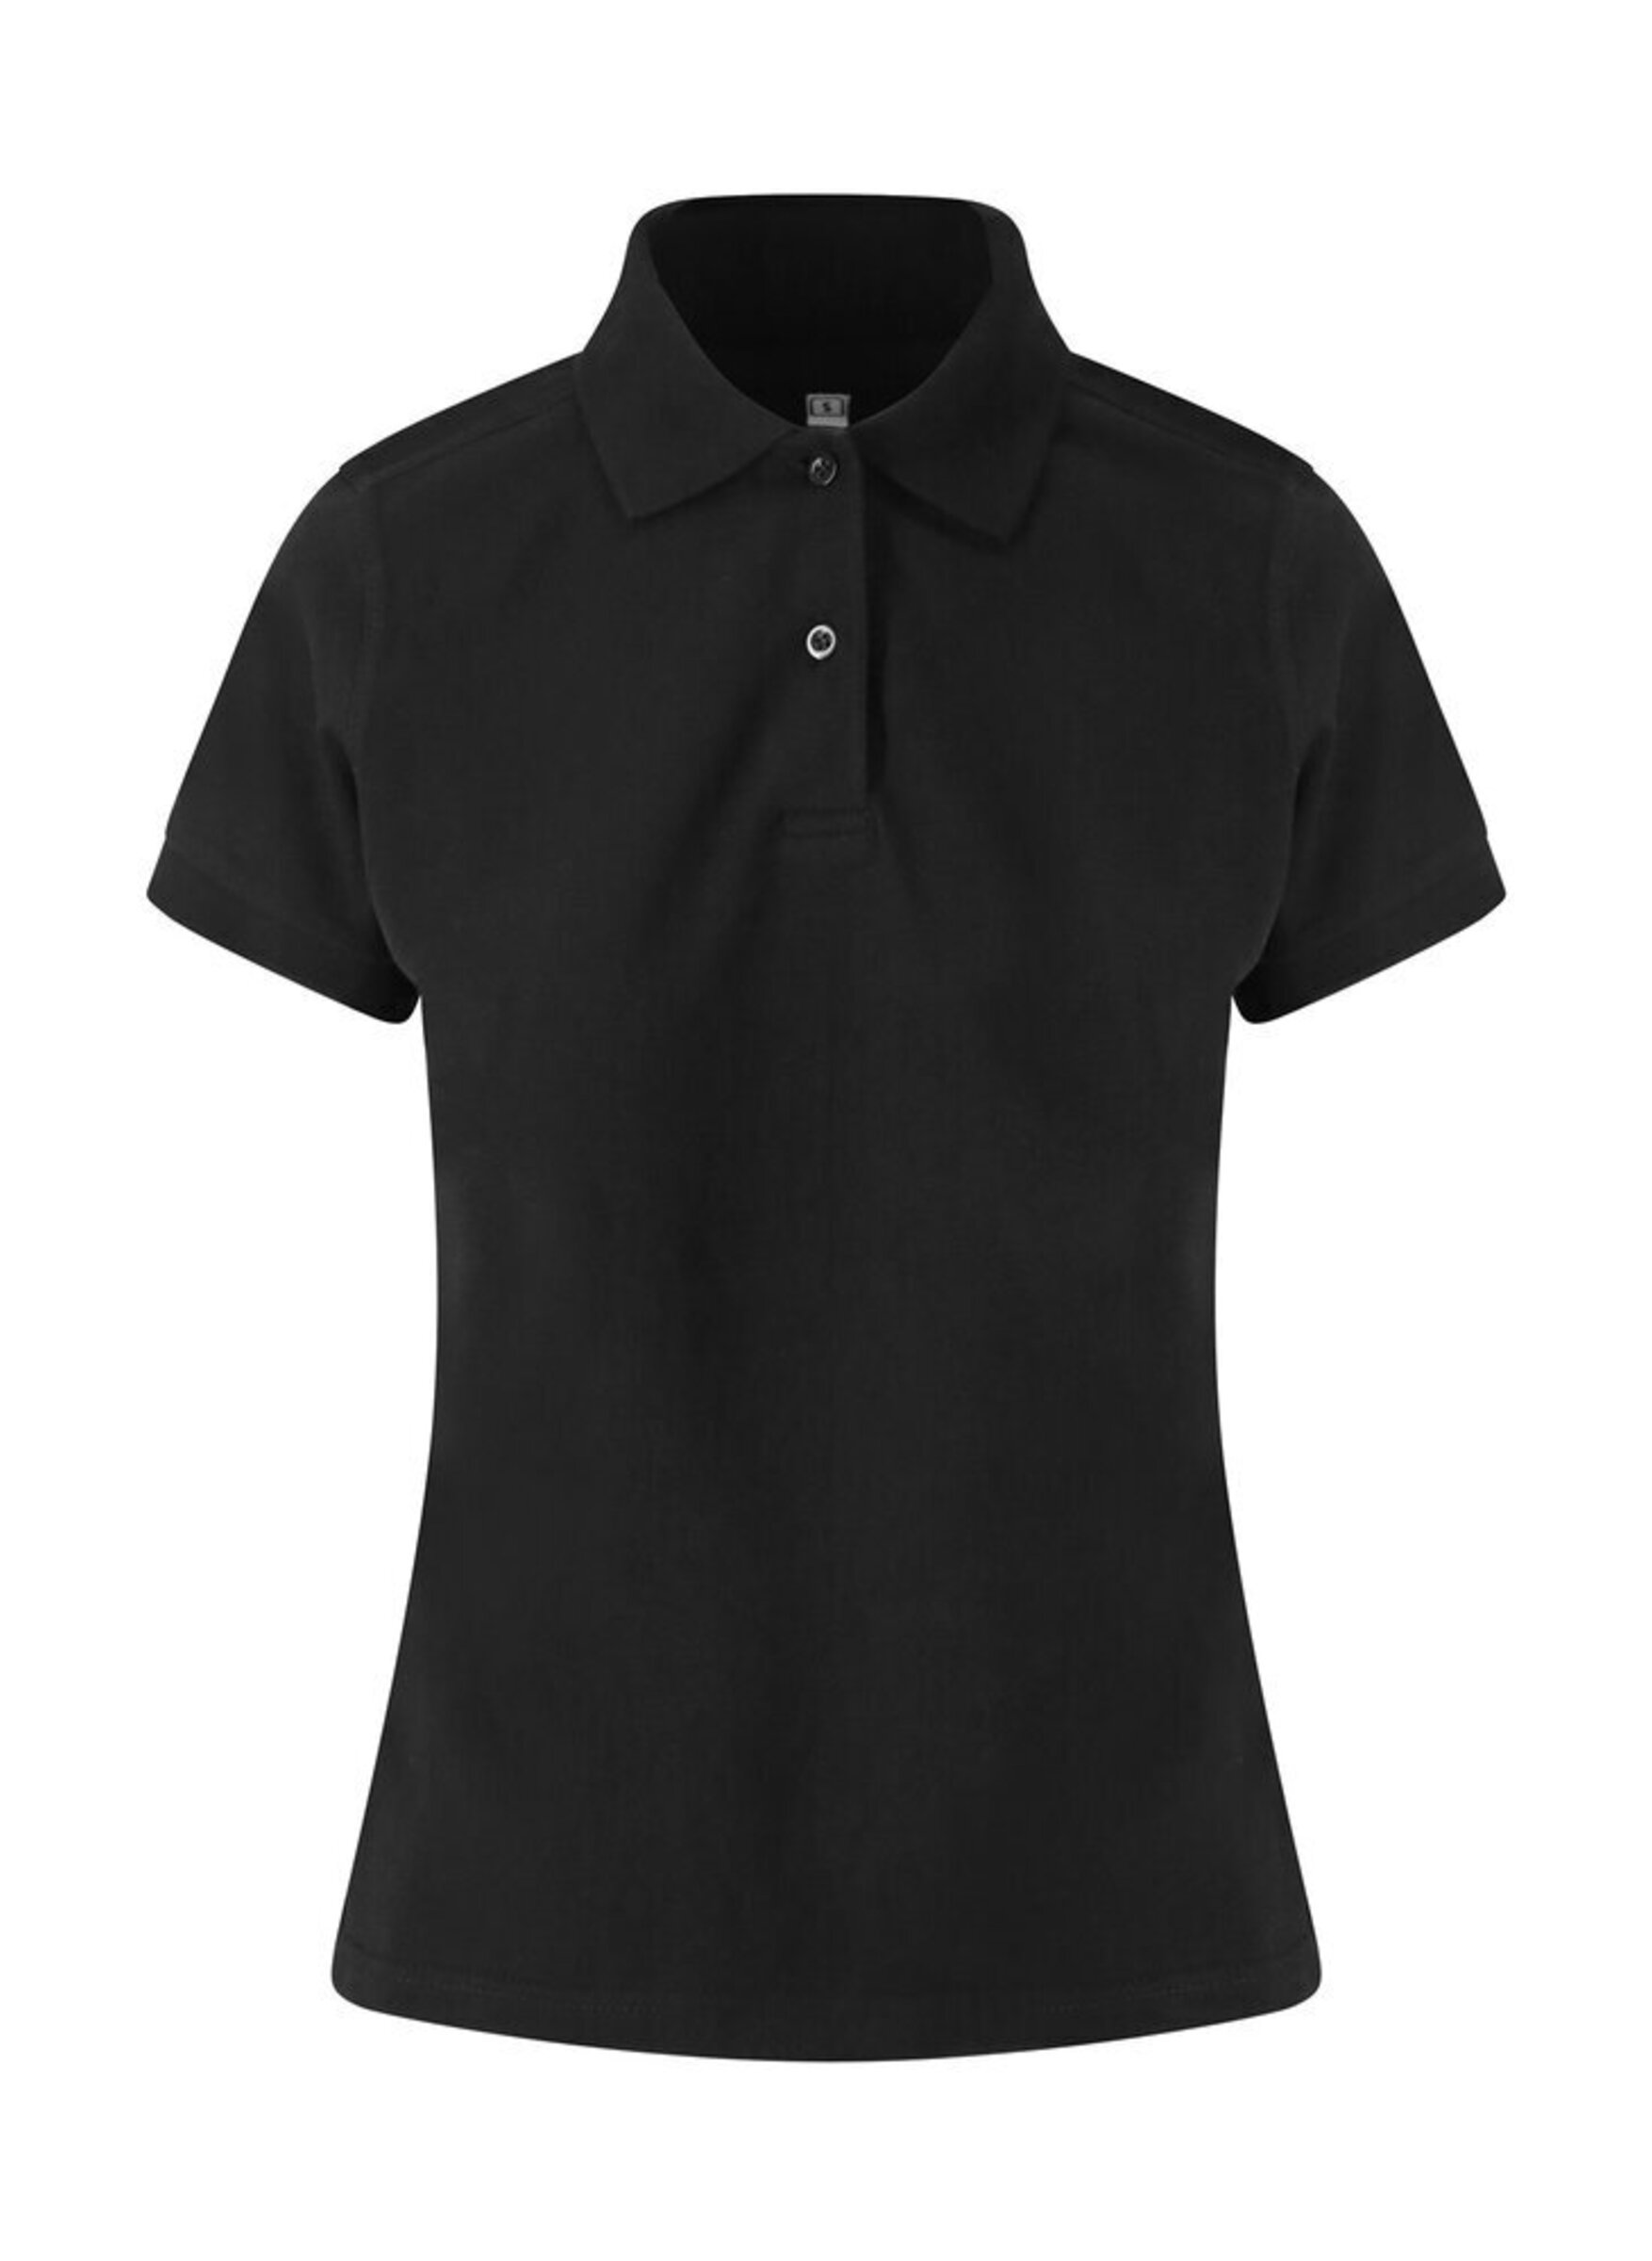 Just Polos Women's Stretch Polo